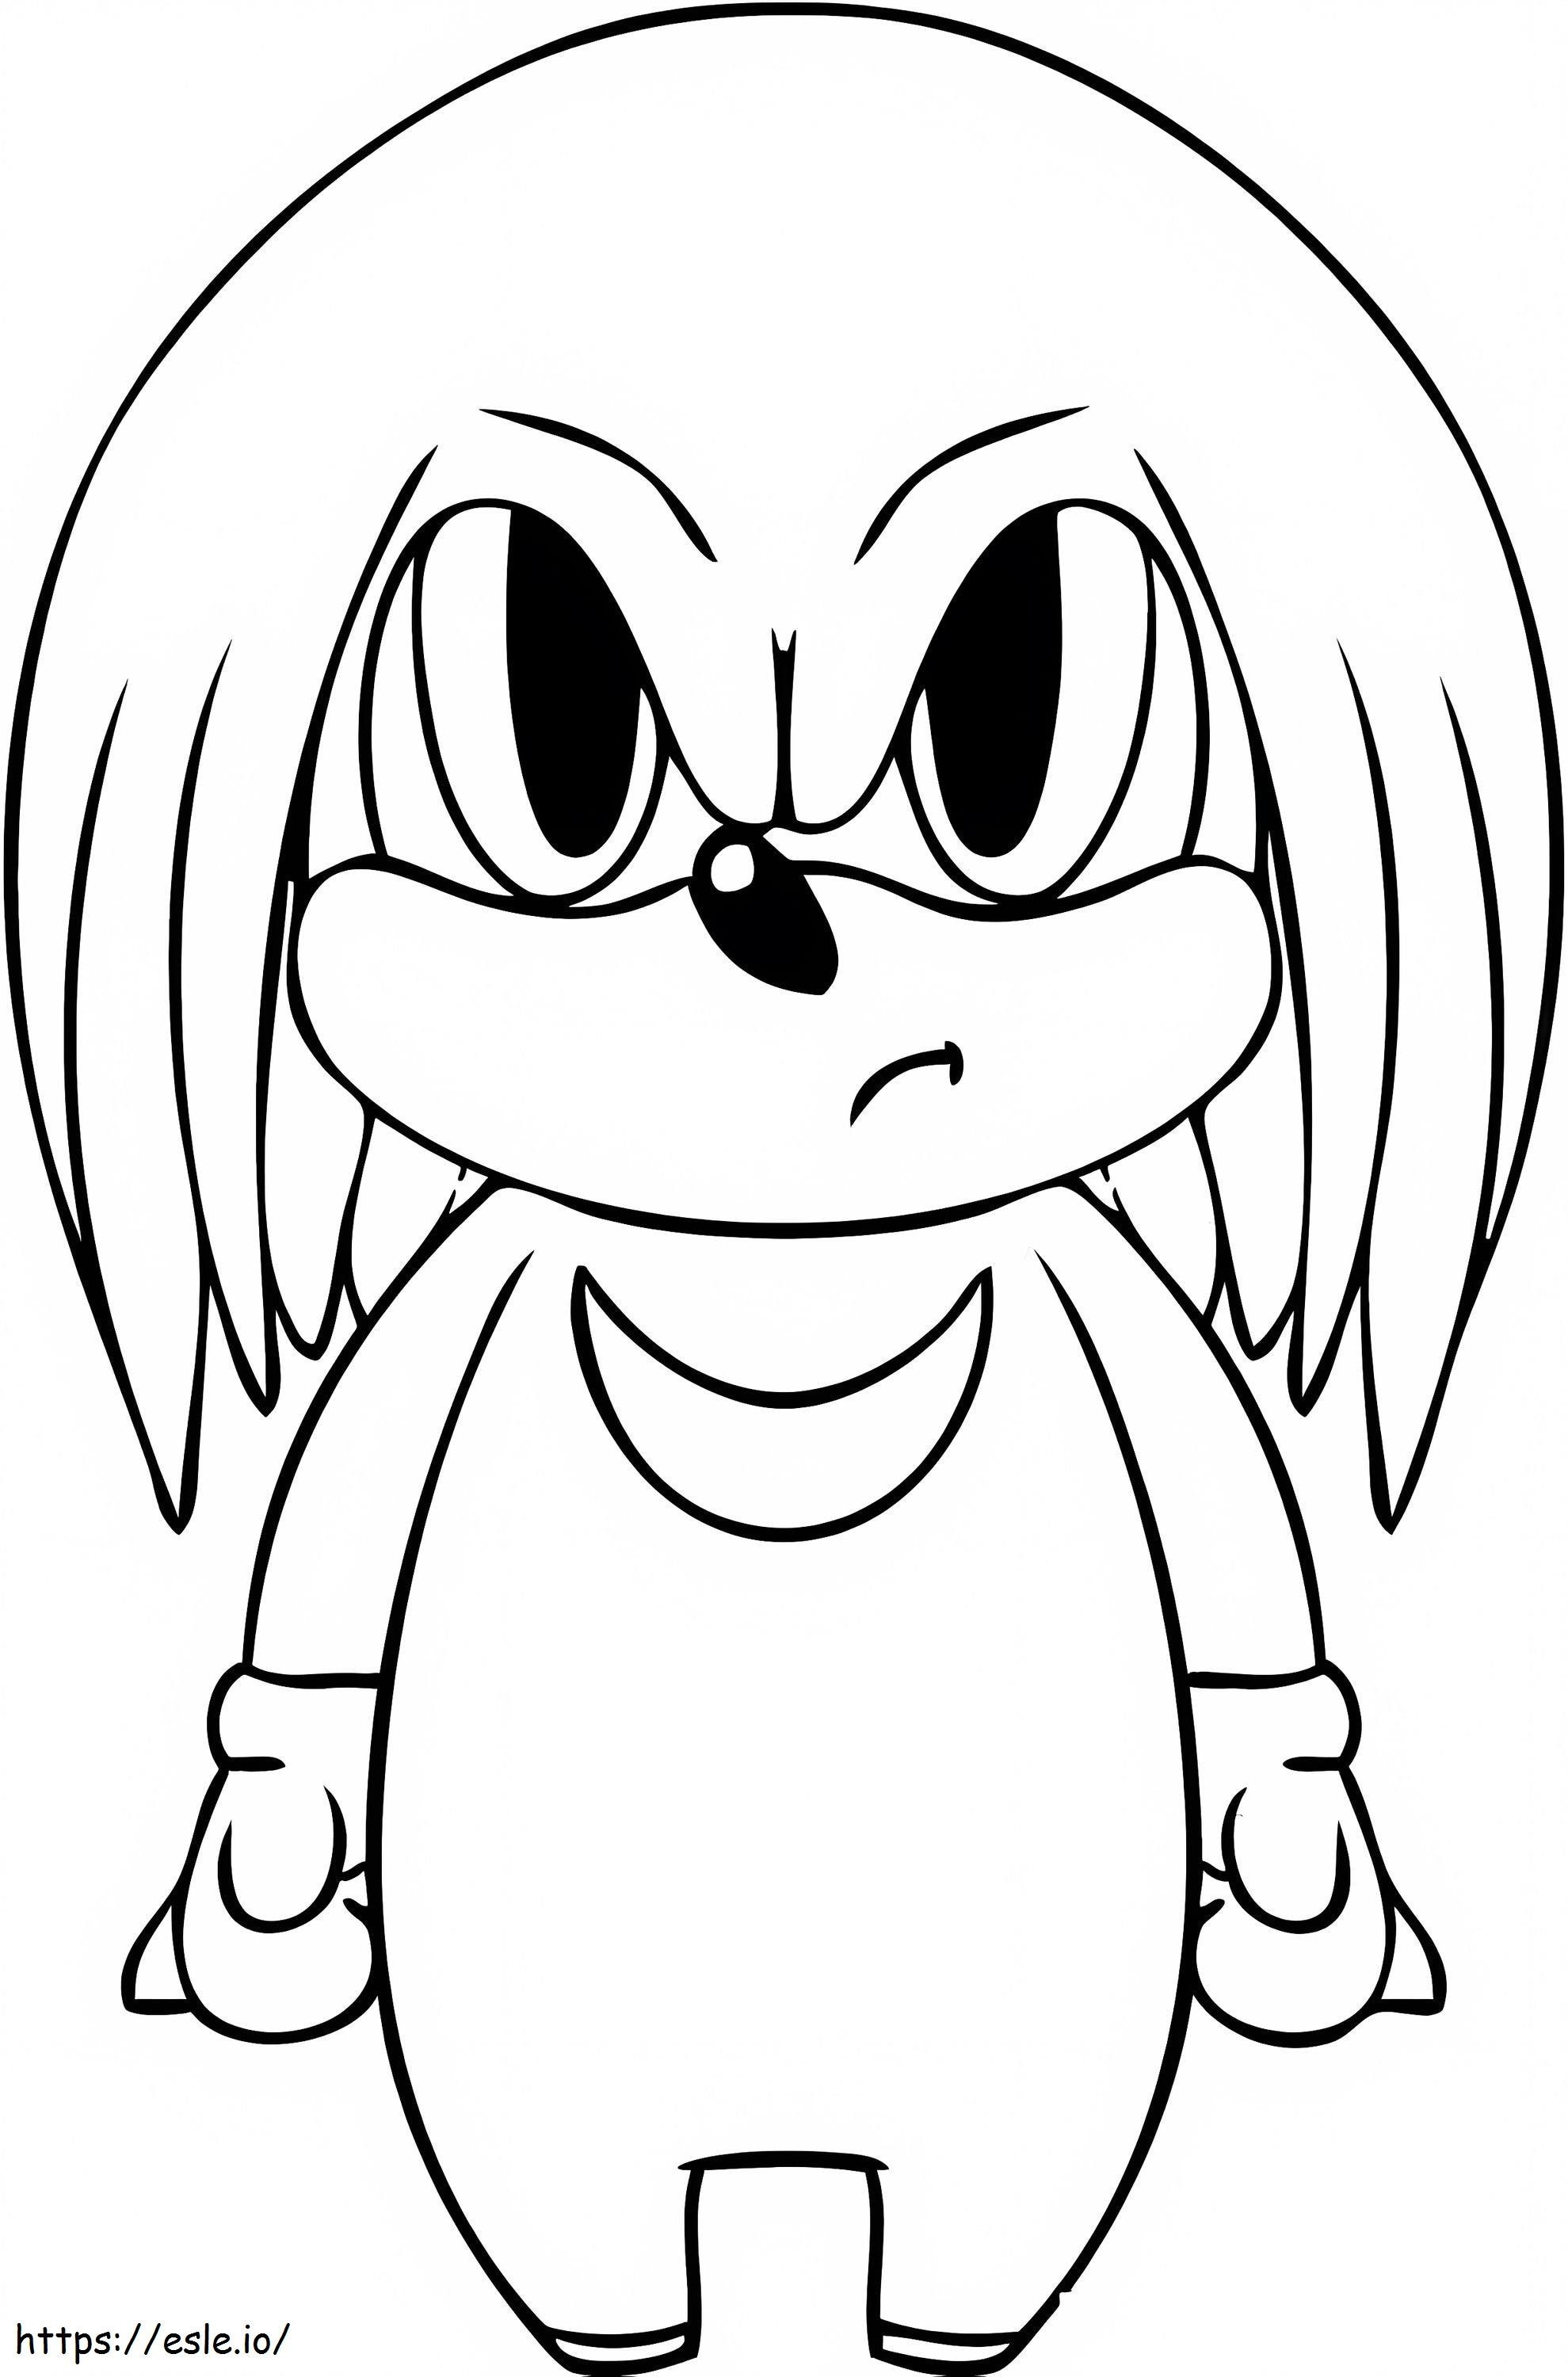 Cute Knuckles The Echidna coloring page